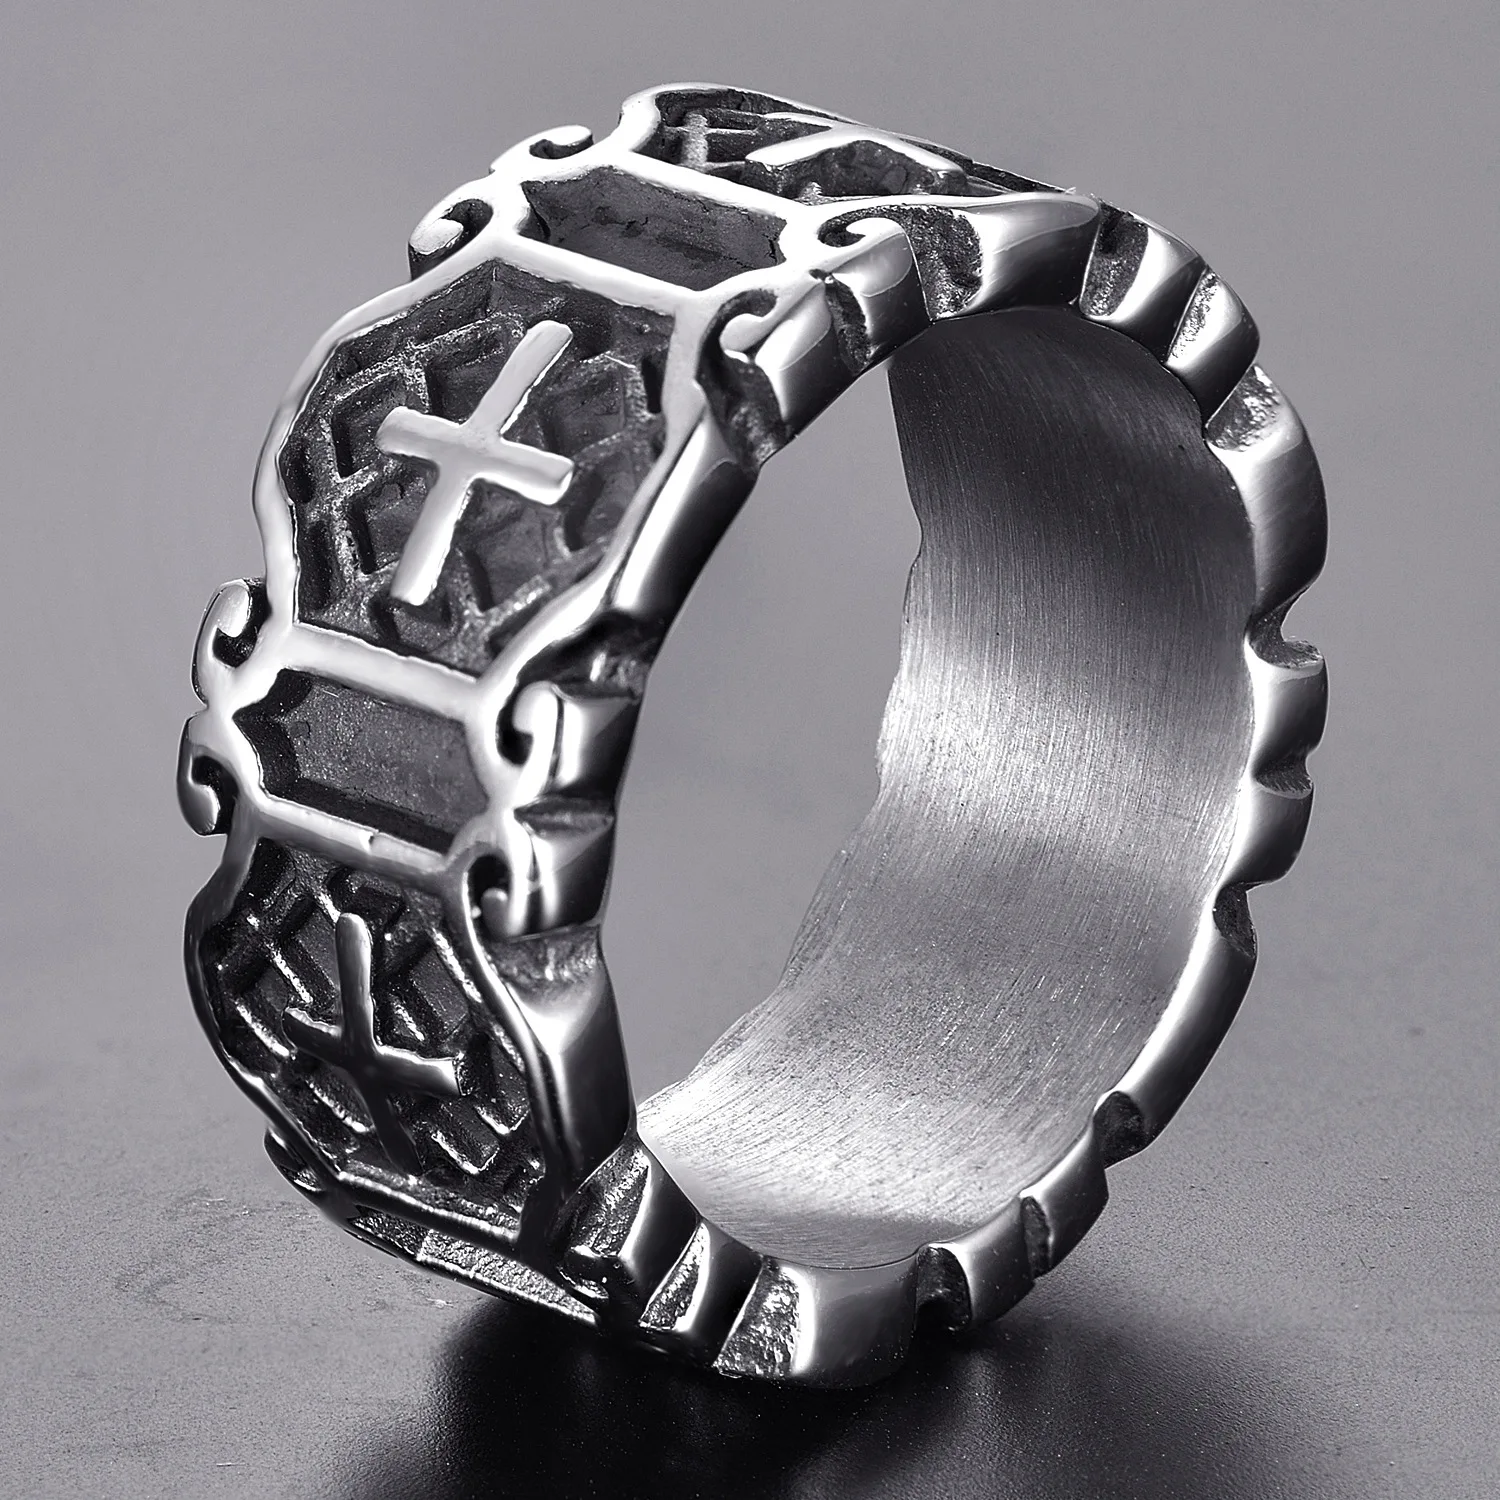 Retro Silver Color Punk Pattern Cross Ring for Men's Fashion Trend Street Hip-Hop Rock Goth Accessories Jewelry Gift Wholesale